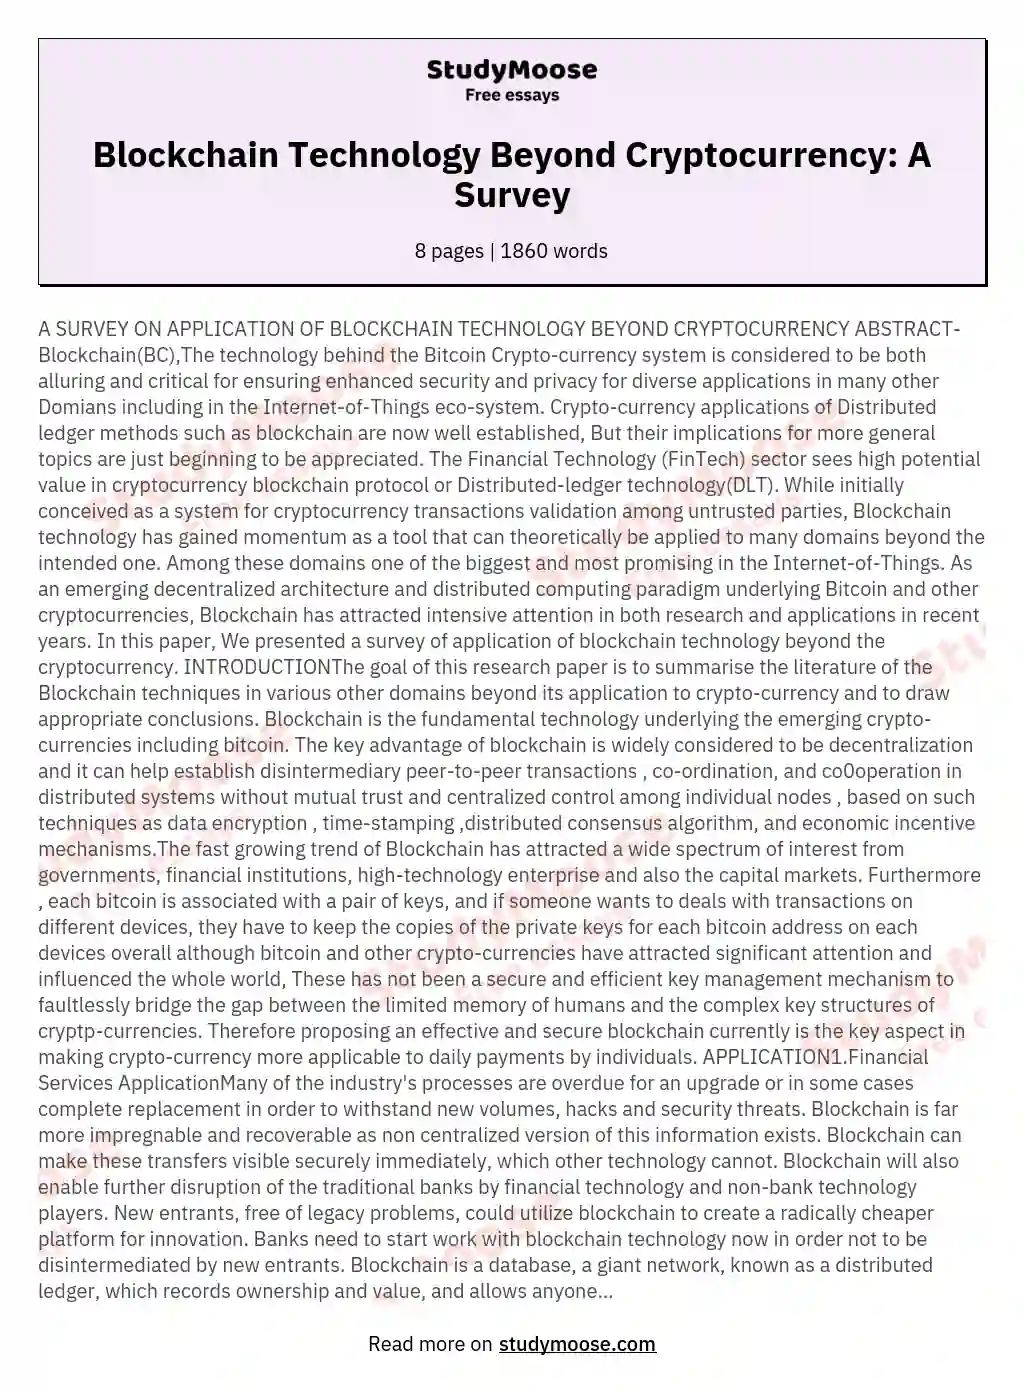 A SURVEY ON APPLICATION OF BLOCKCHAIN TECHNOLOGY BEYOND CRYPTOCURRENCY ABSTRACT BlockchainBCThe technology